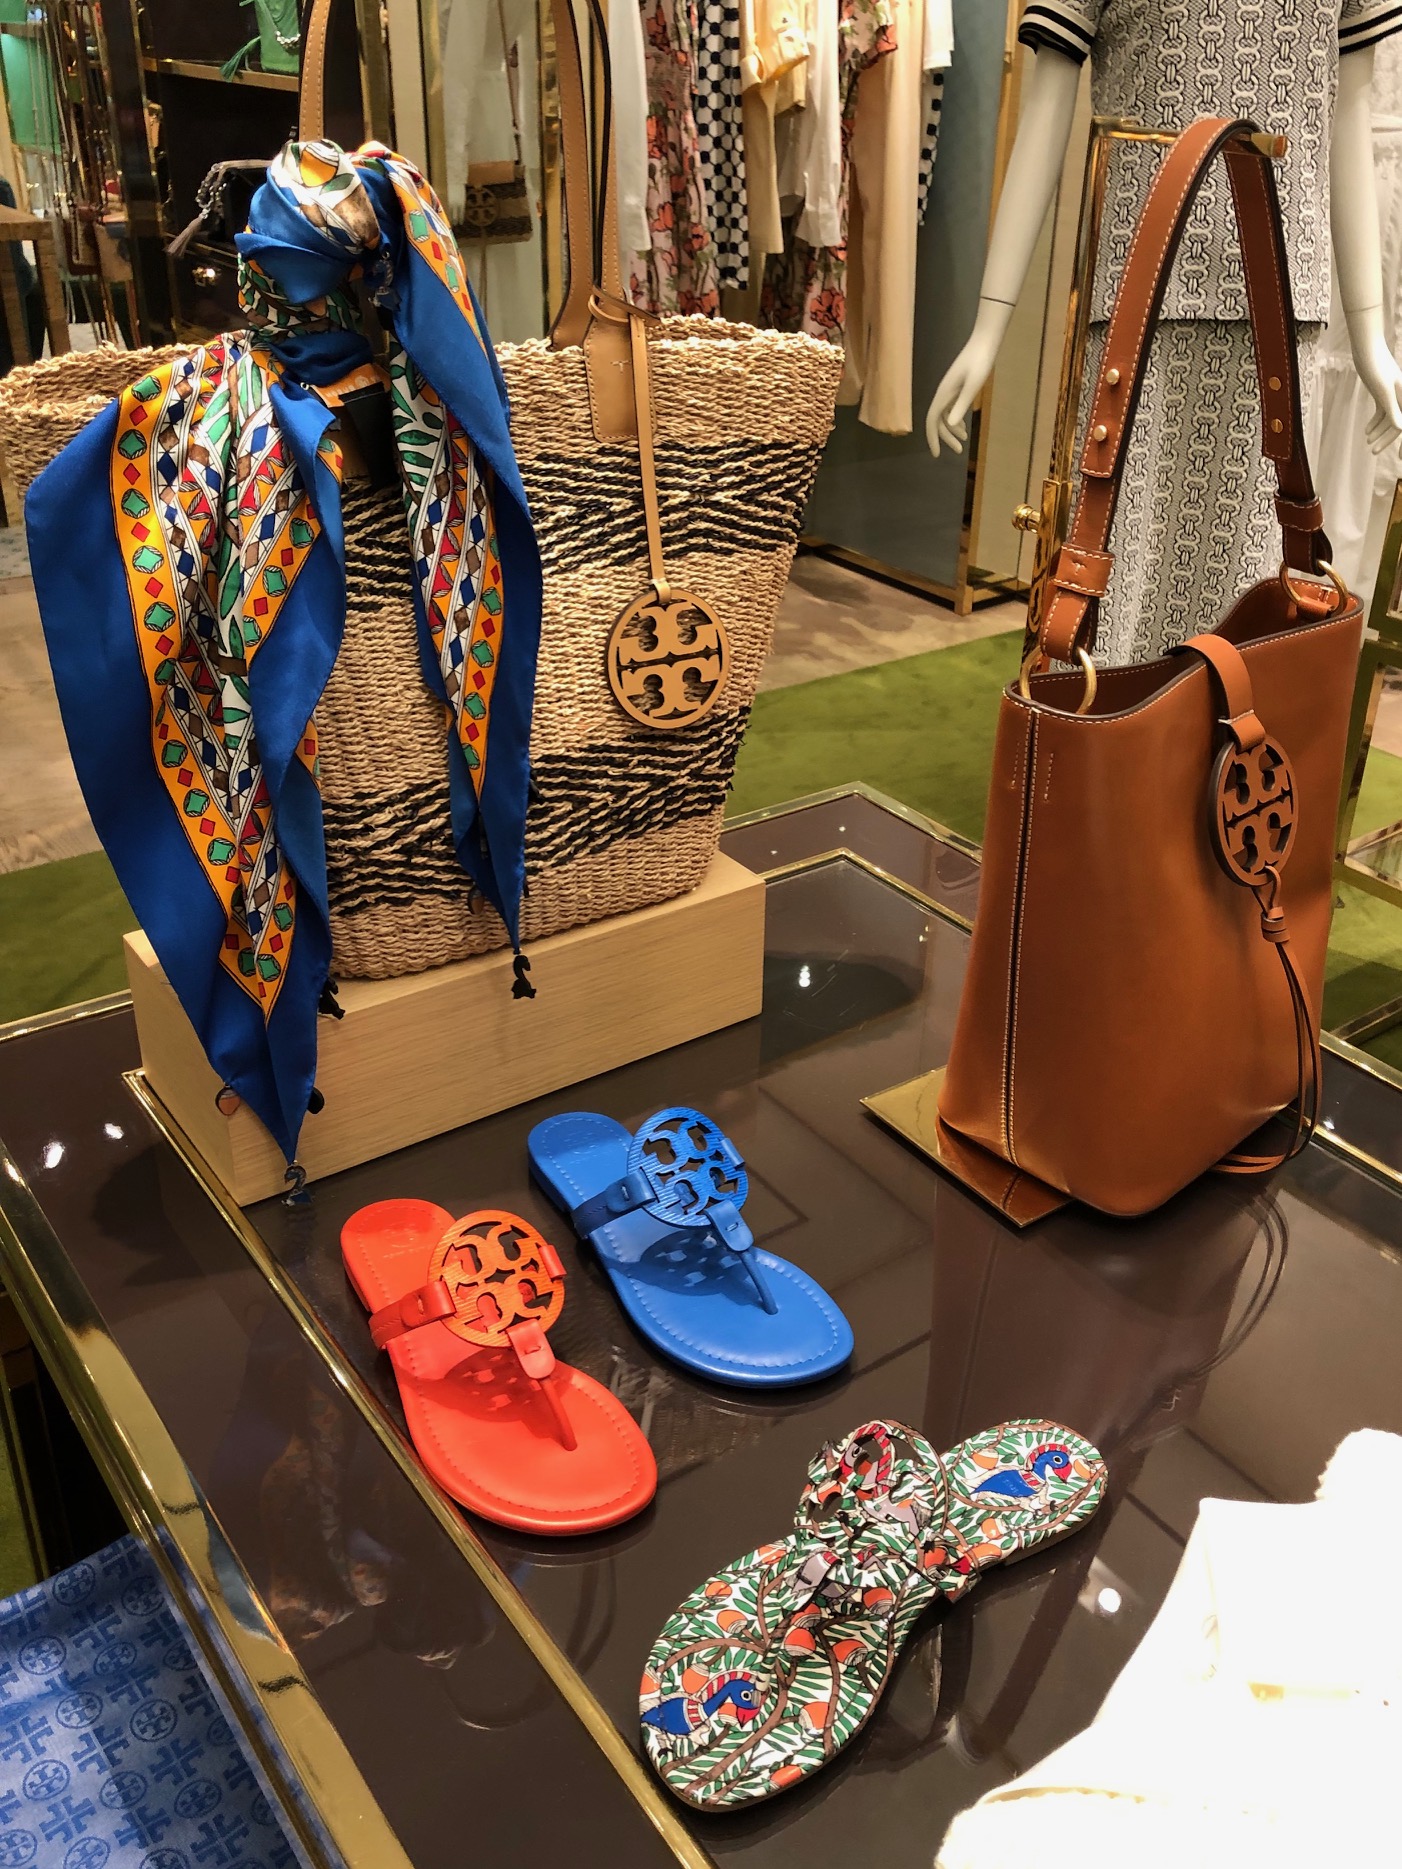 Tory Burch Spring Event 2019  Save Up To 30% Off! - The Double Take Girls